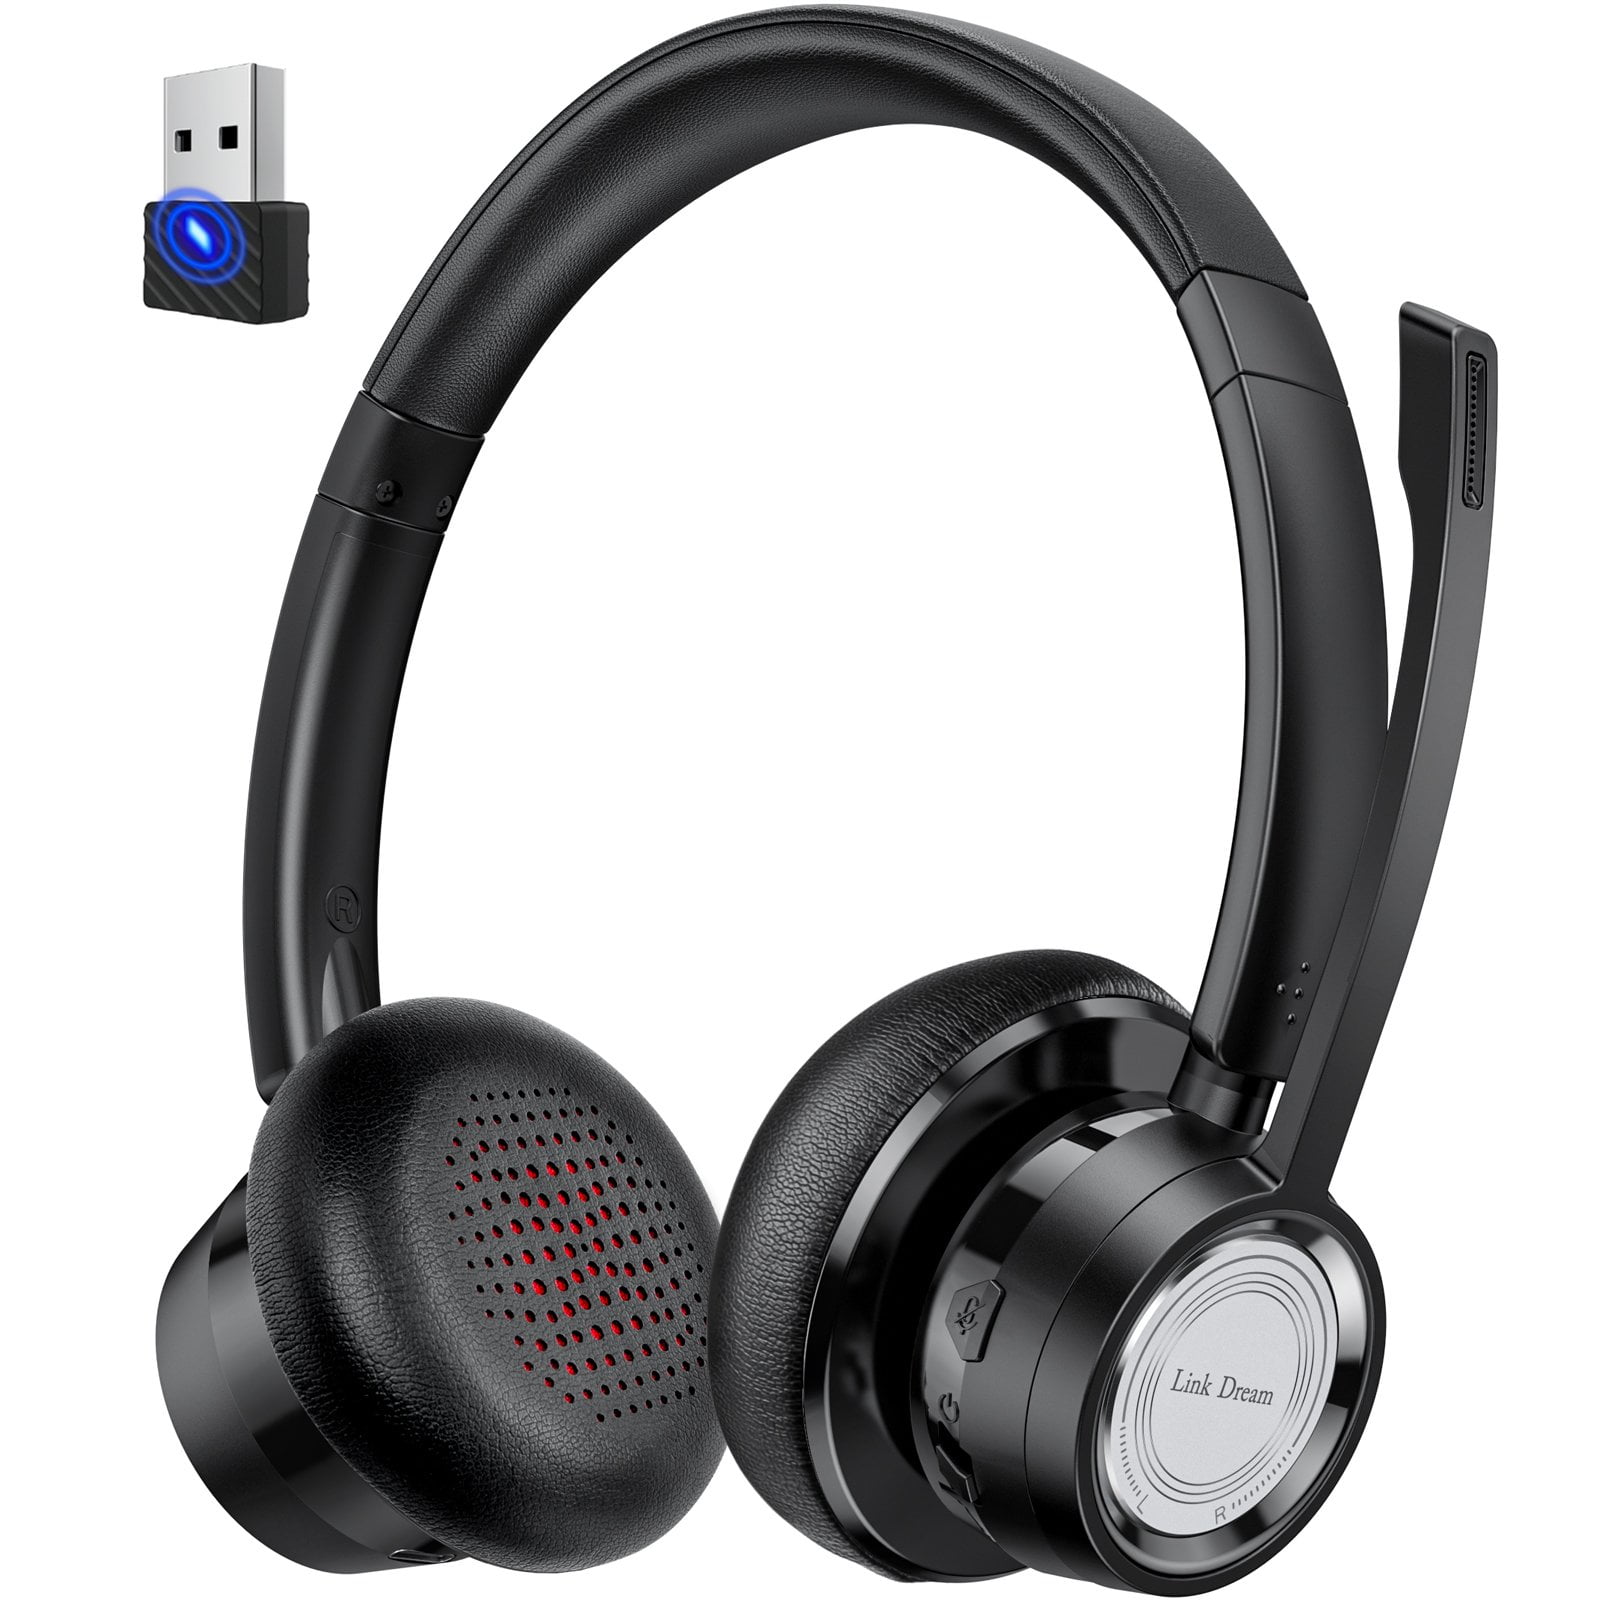 National flag Characteristic soul new bee bluetooth headset review Ru  nickel Play with